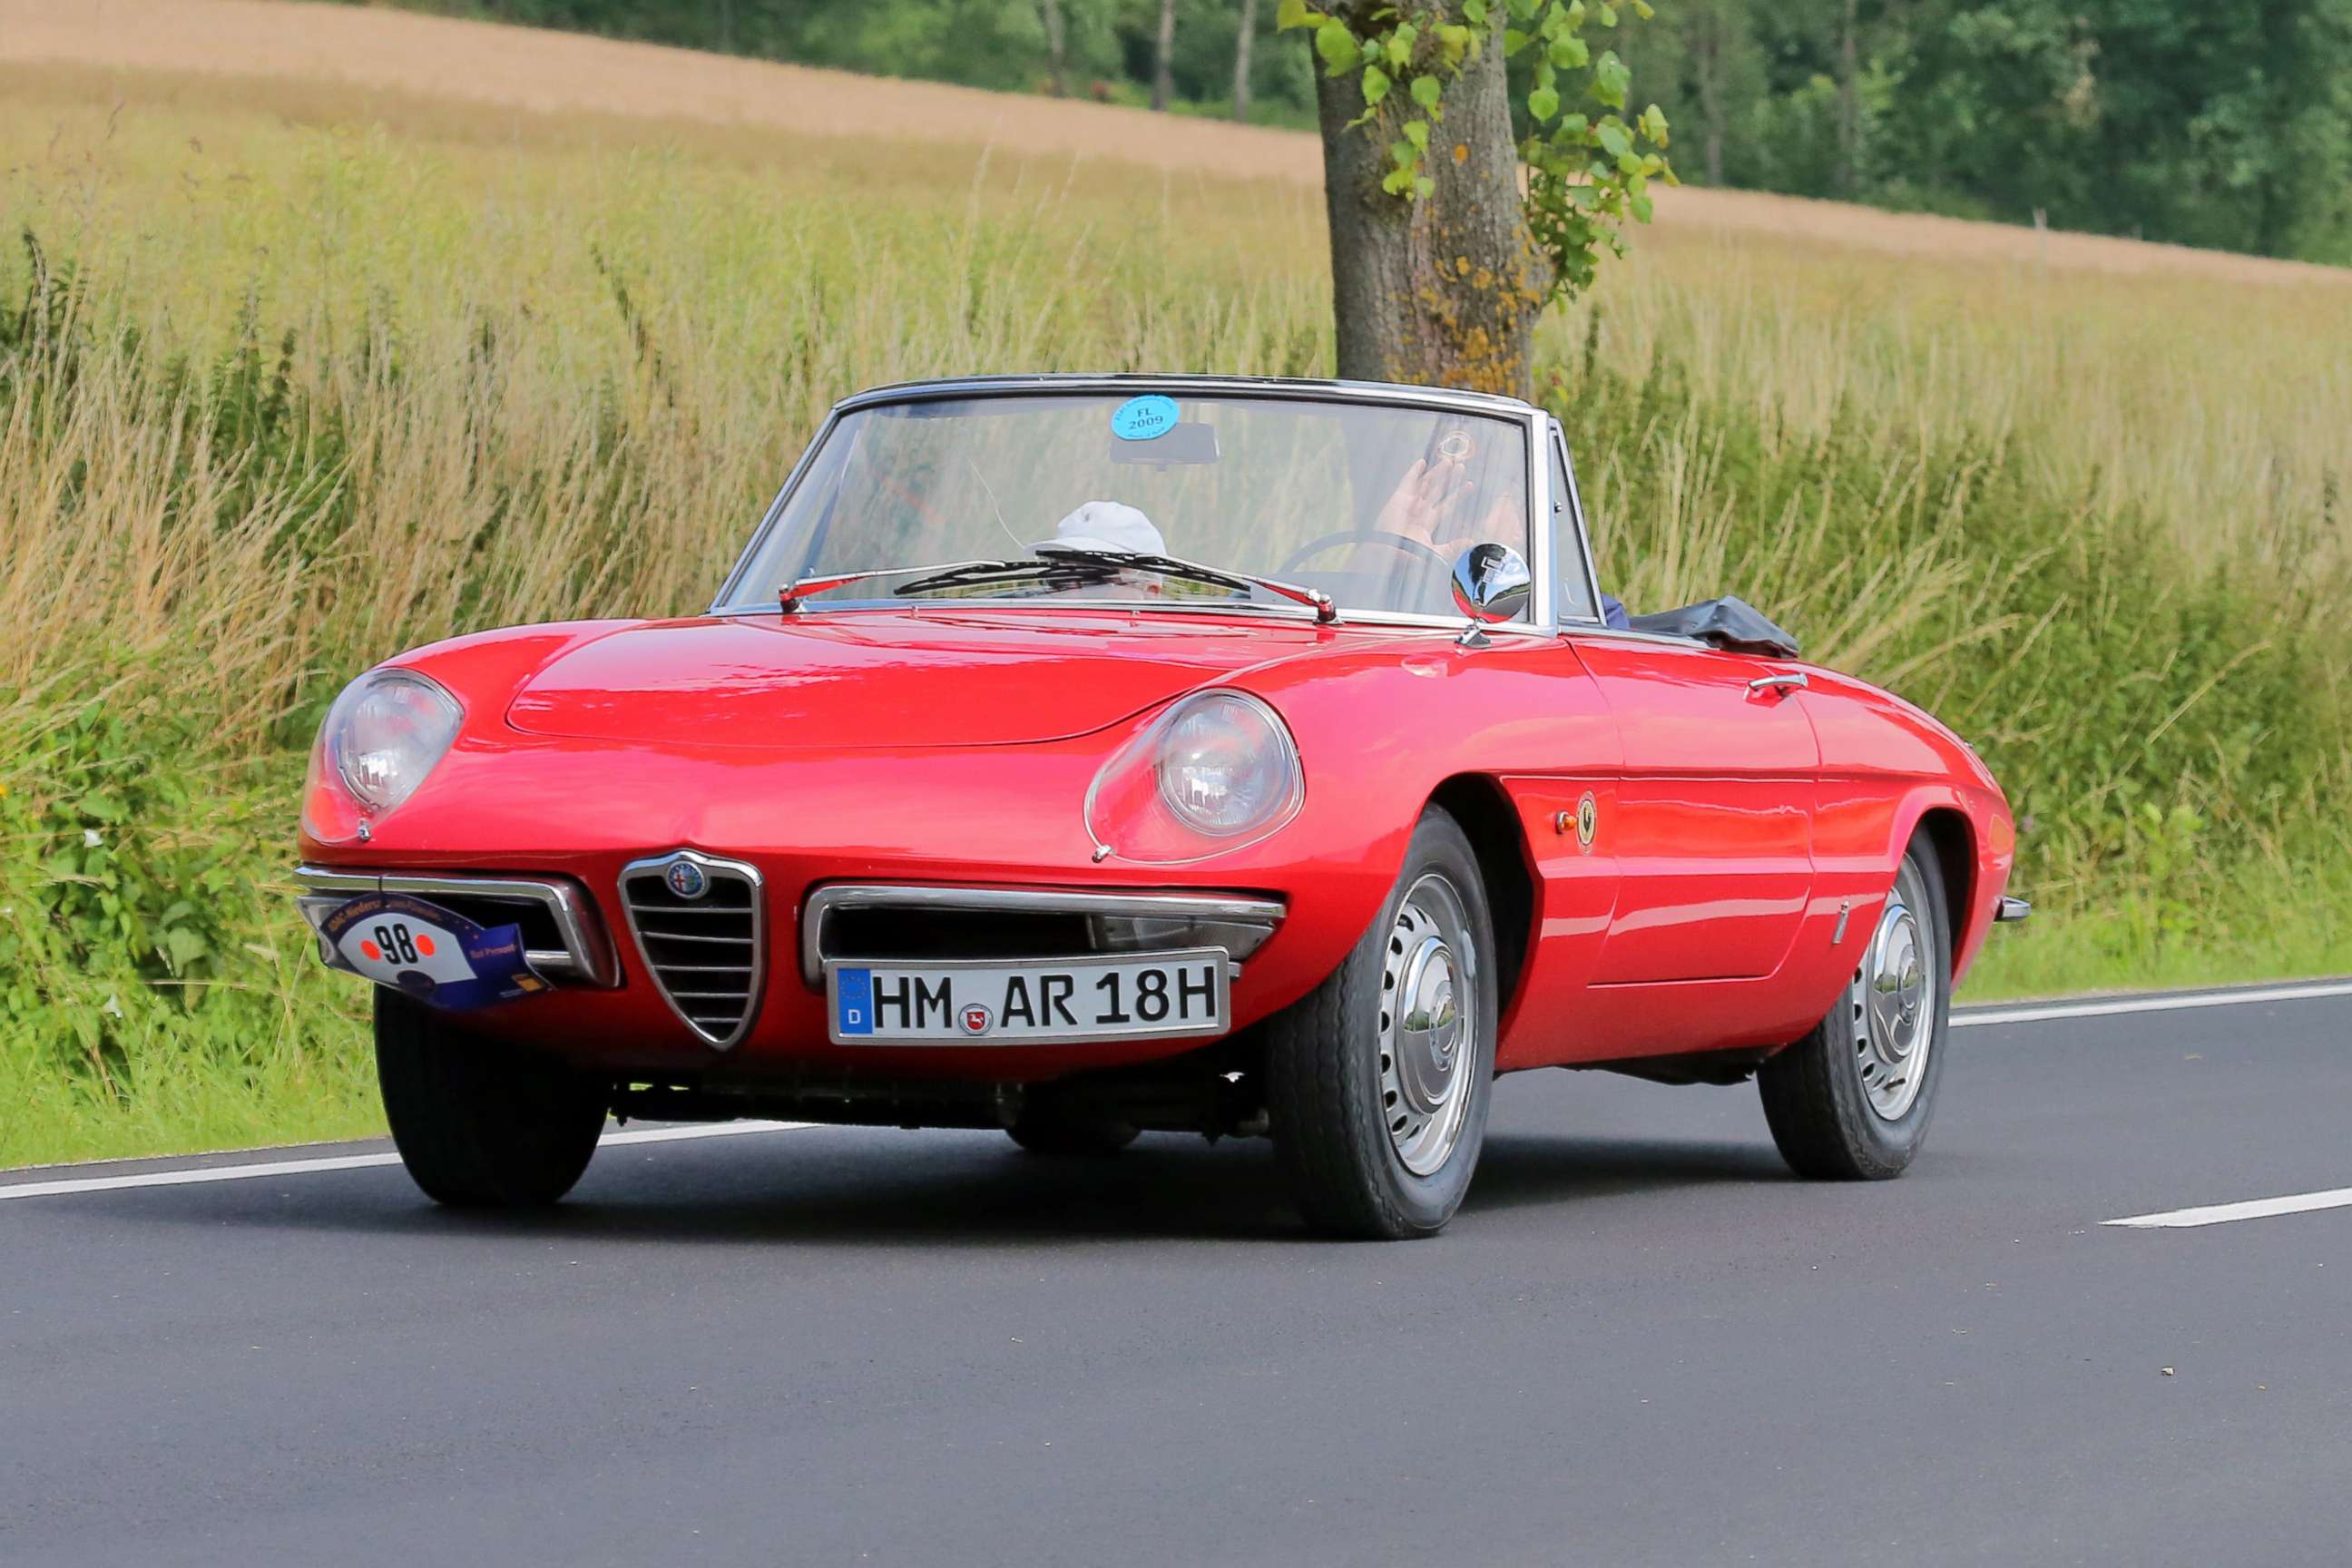 PHOTO: A 1966 Alfa Romeo Spider Duetto is pictured on the road in Bad Pyrmont, Germany, July 17, 2015.